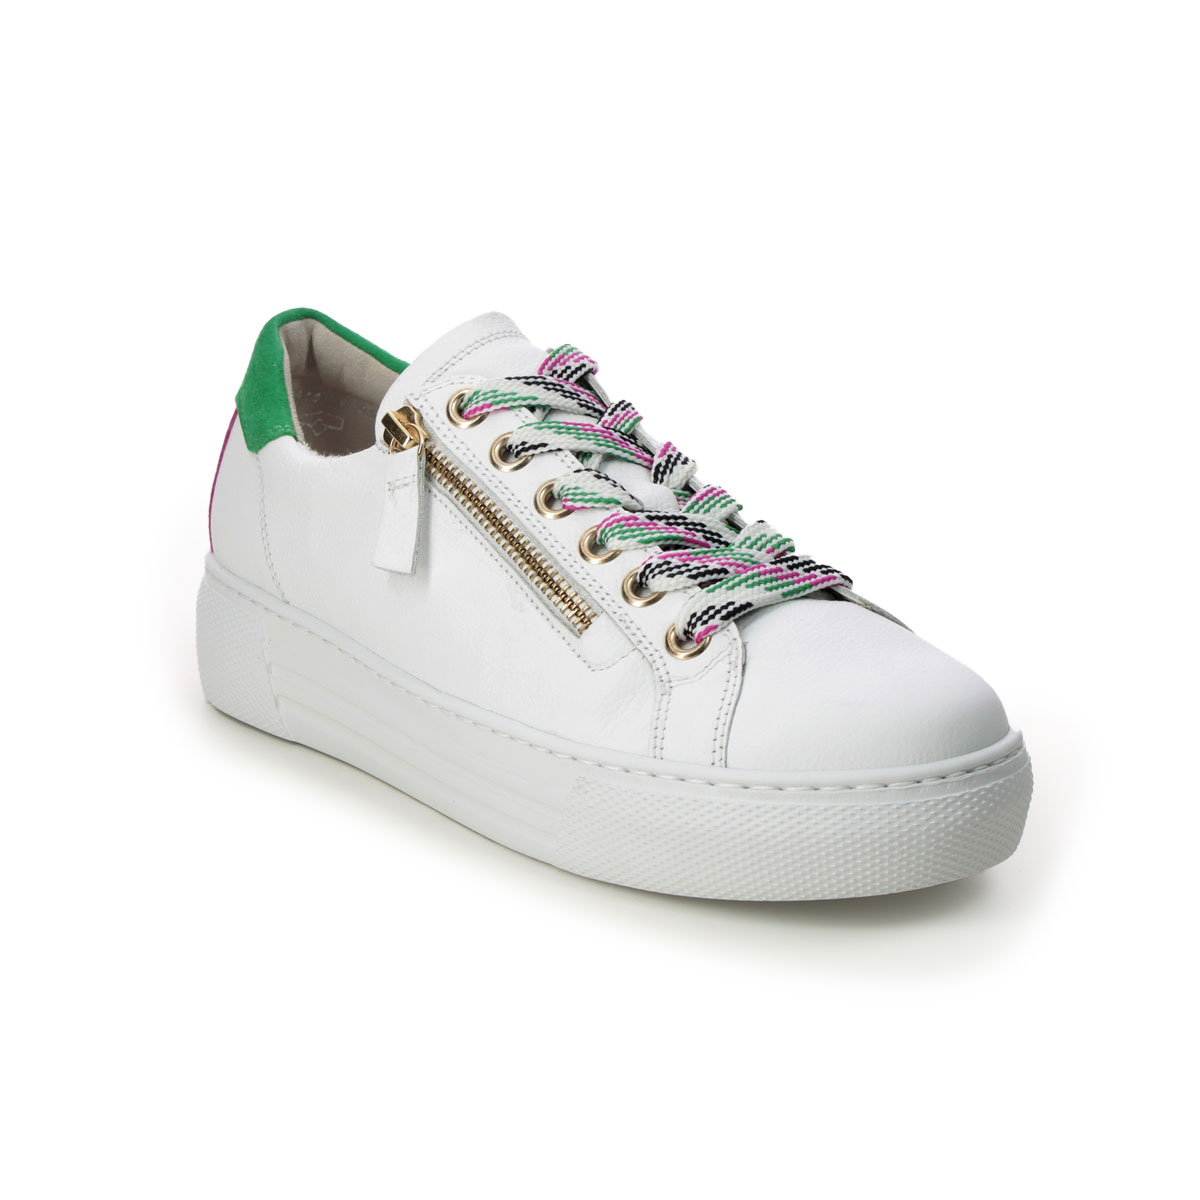 Gabor Campus Zip White multi Womens trainers 46.465.53 in a Plain Leather in Size 6